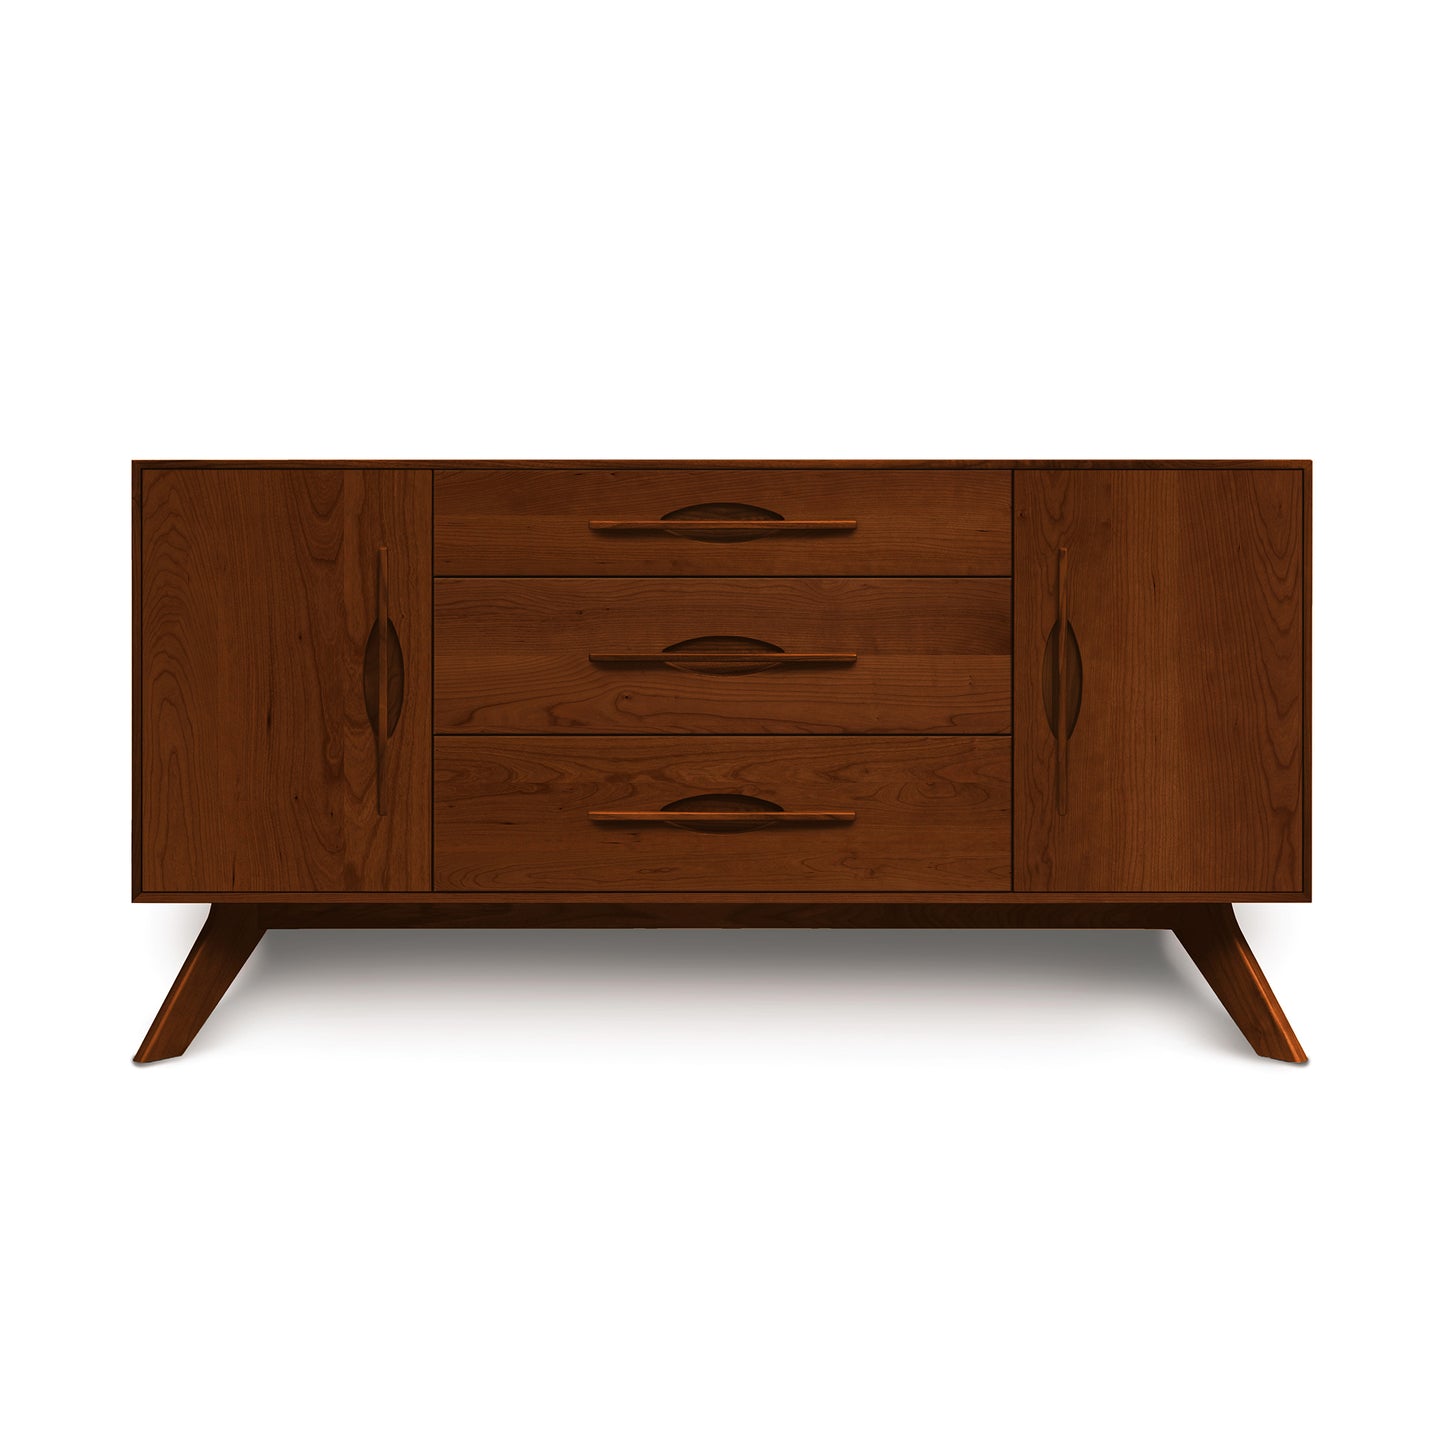 A Copeland Furniture Audrey 2-Door 3-Drawer Buffet with angled legs and three drawers on a white background.